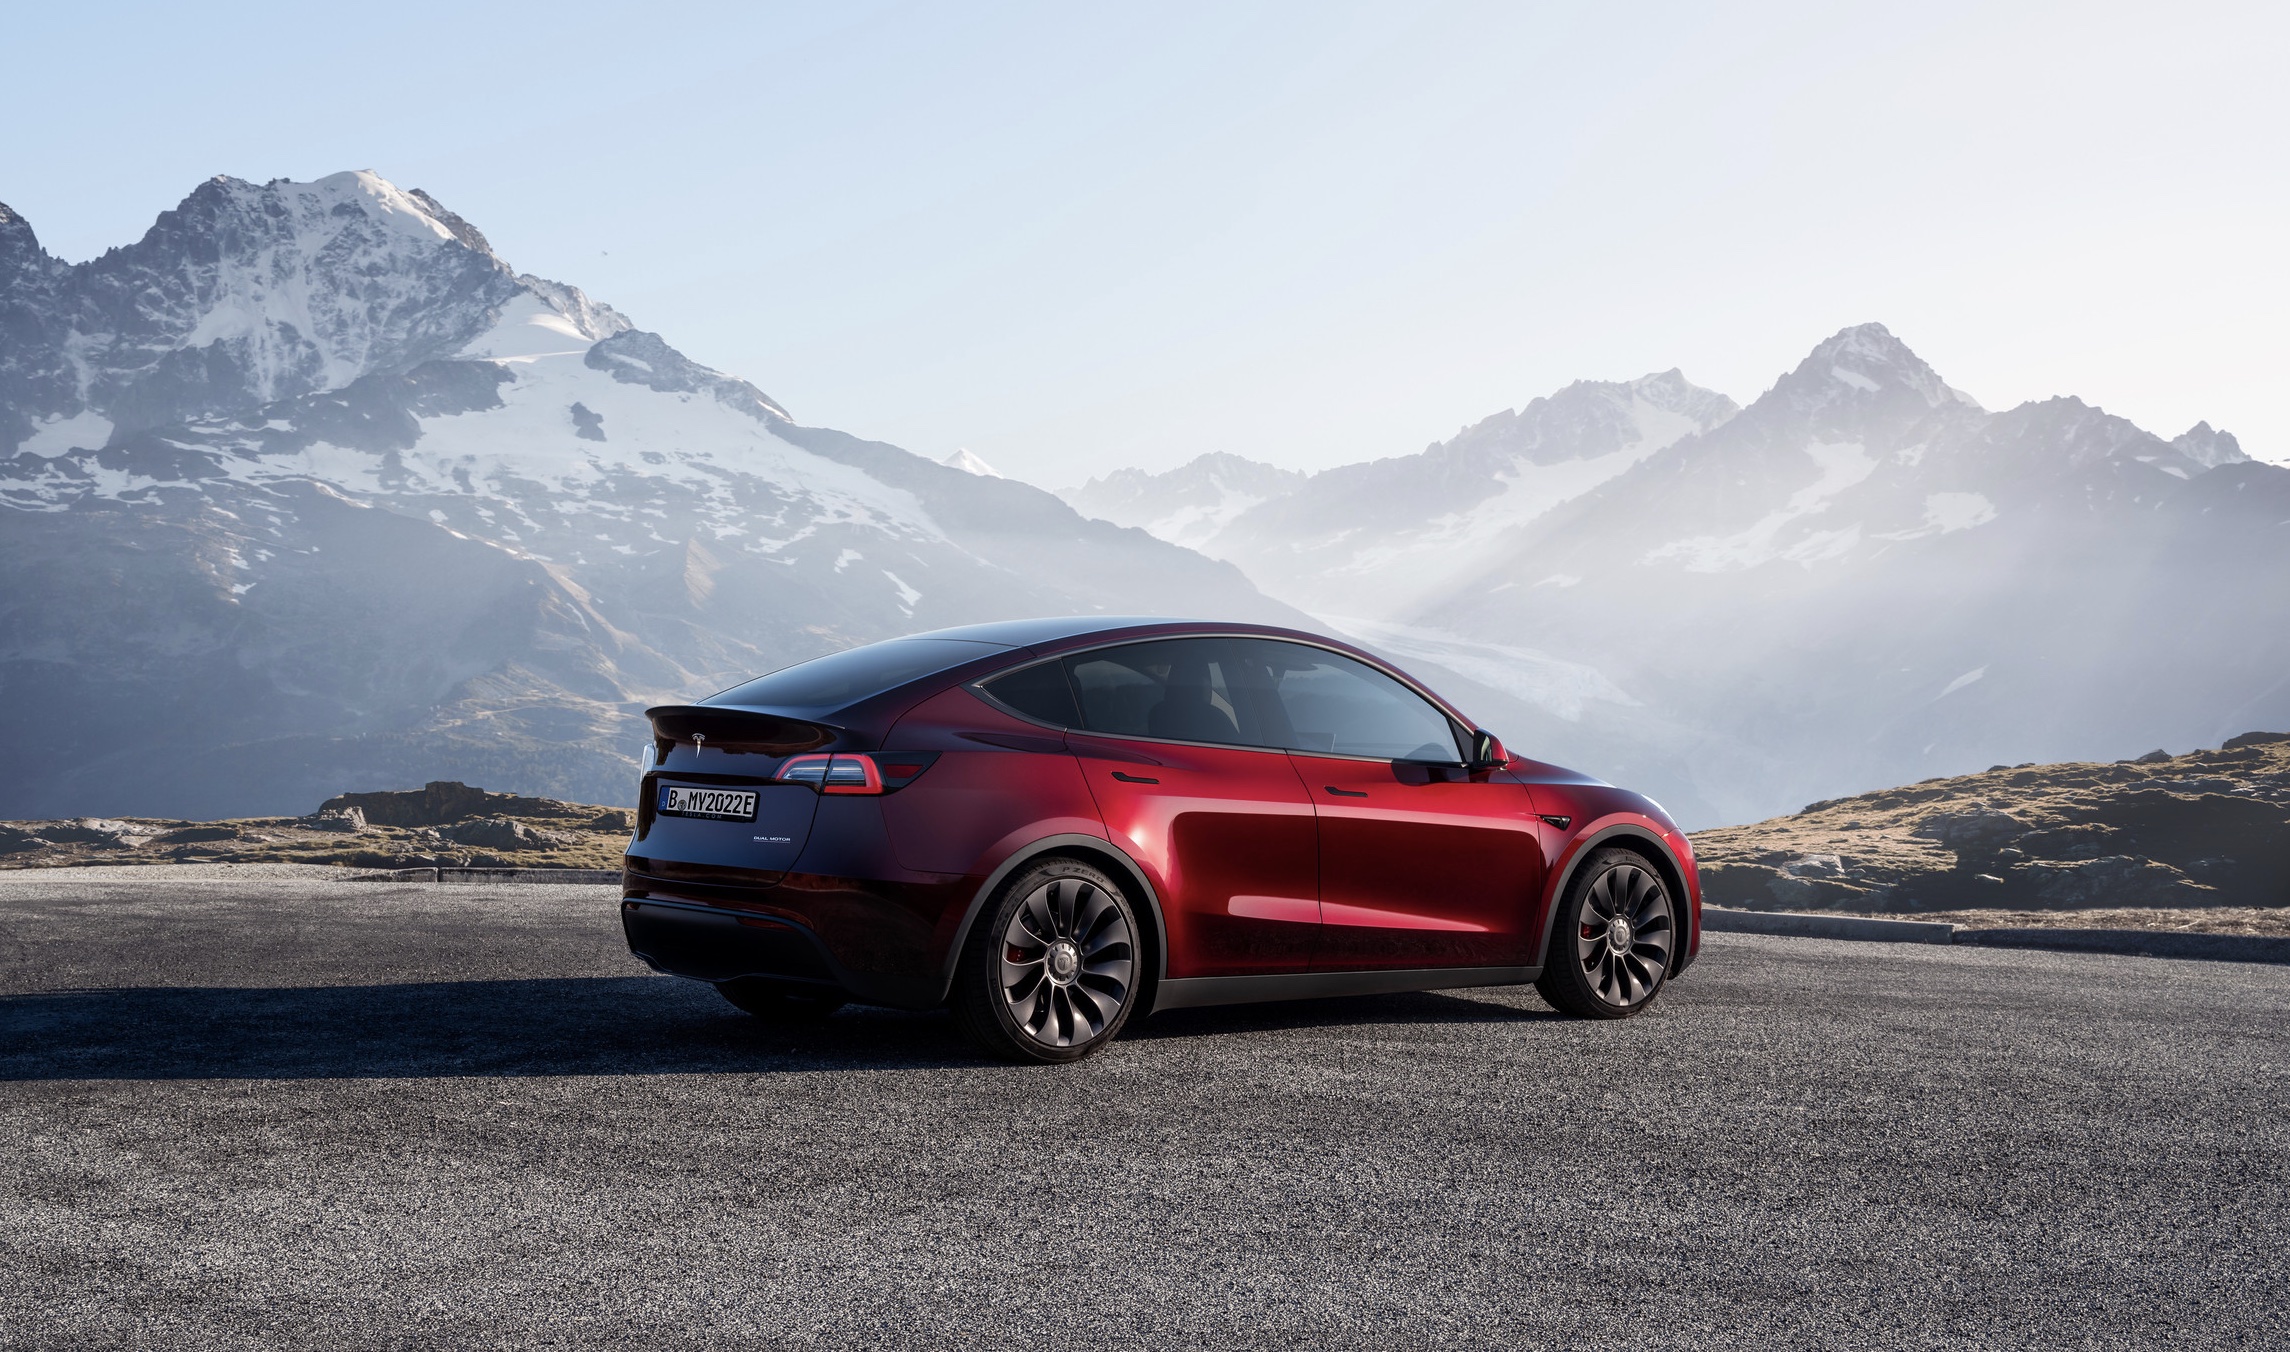 Tesla holds nearly 50% market share in Norway